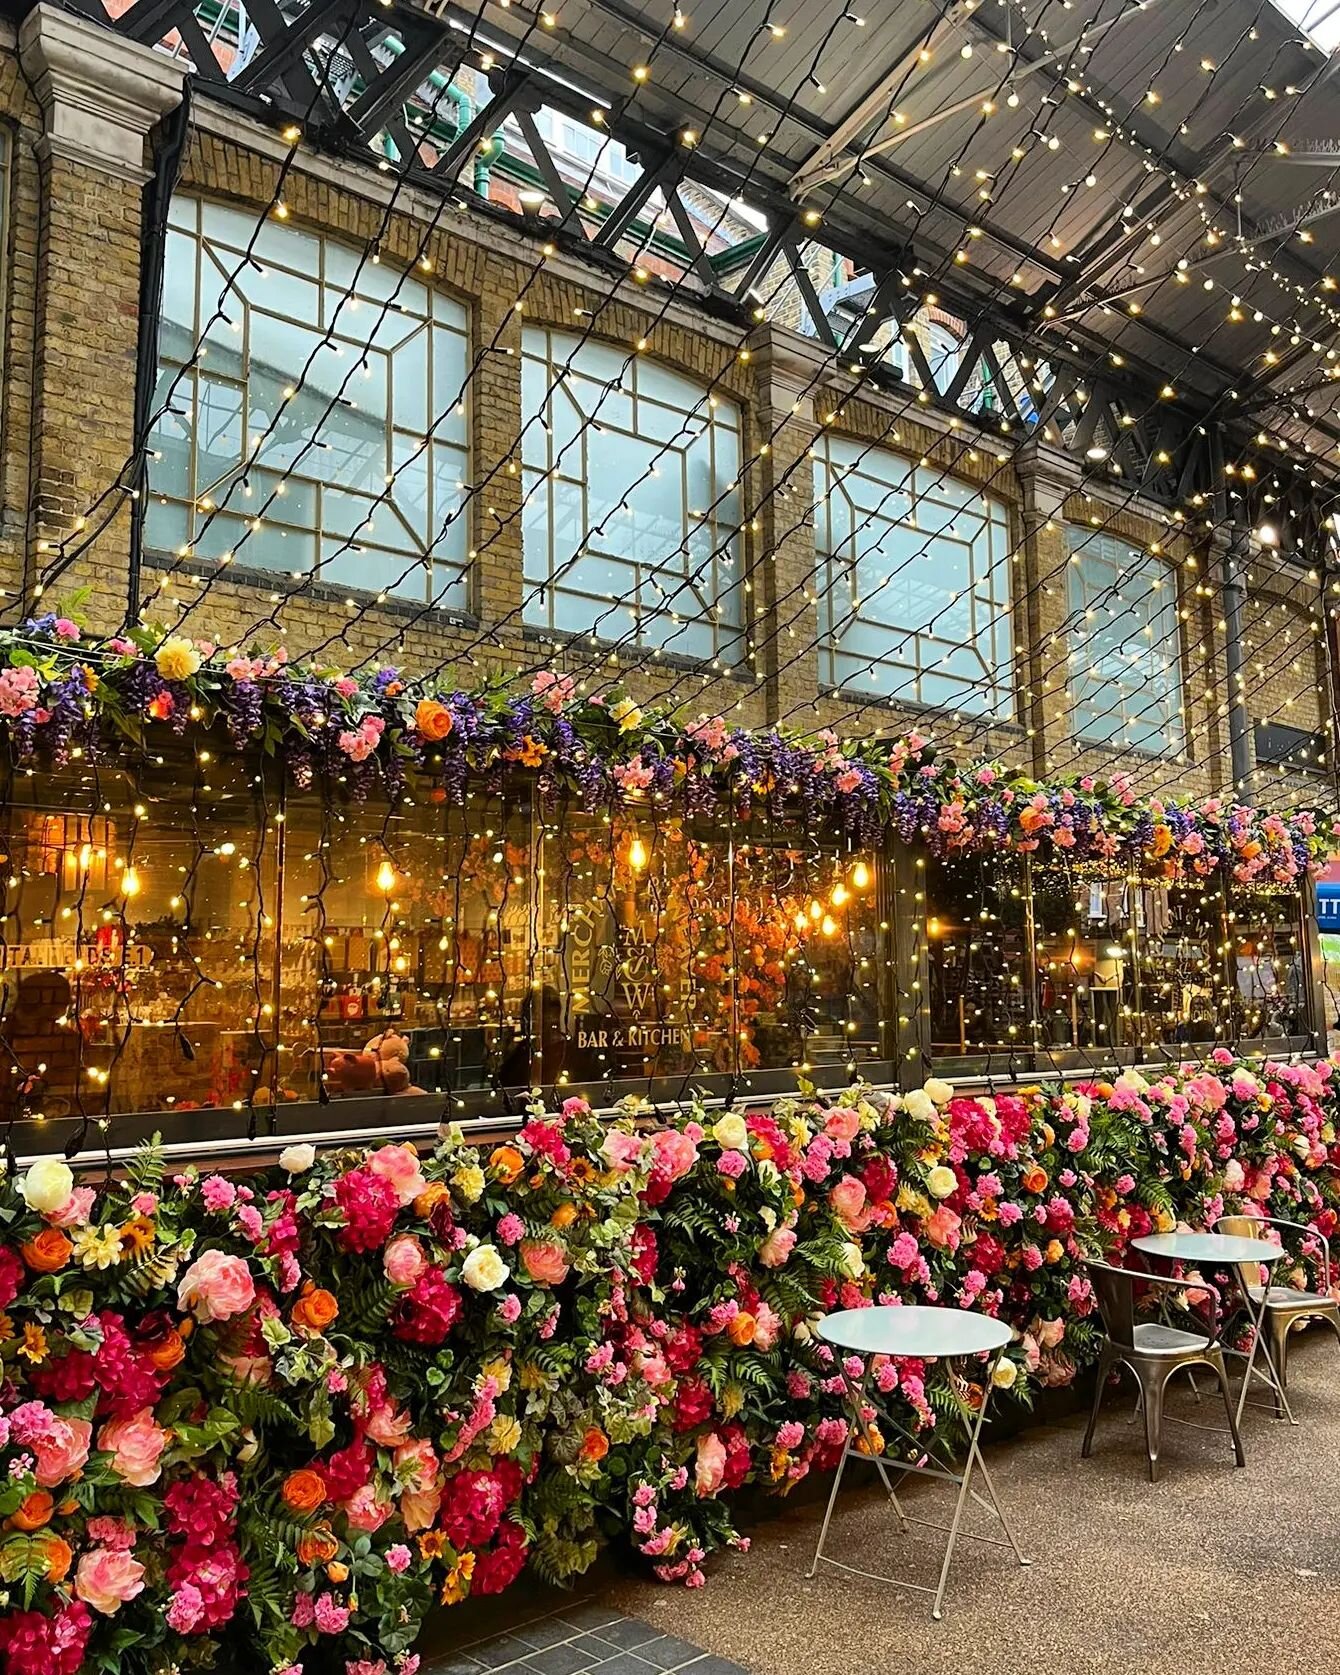 ✨️ A moment for our beautiful conservatory &amp; market side seating ✨️

Book via link in bio or email us: hello@merchantandweaver.co.uk 

❤️🌺🌿✨️